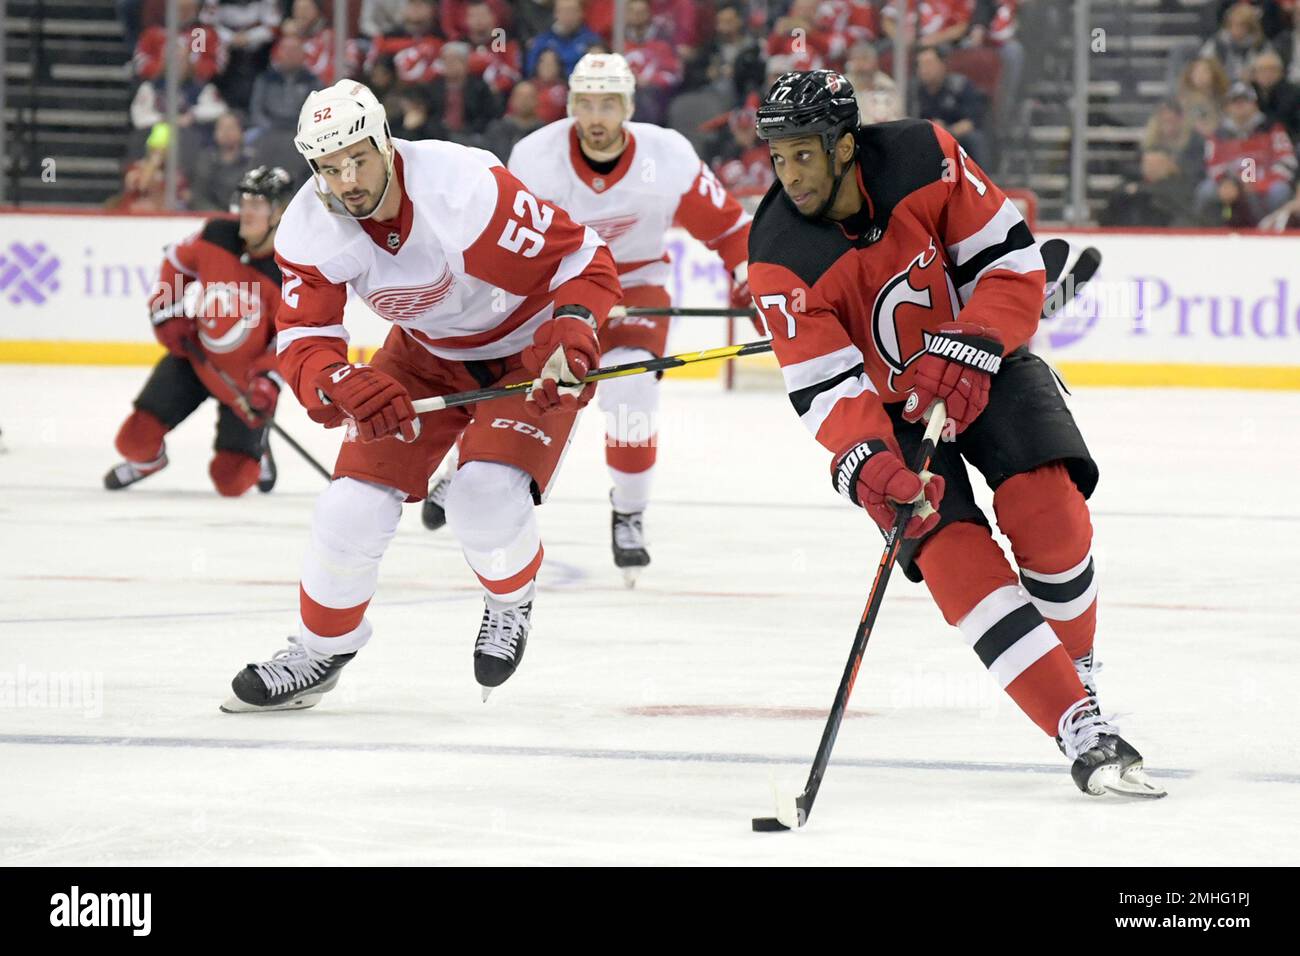 New Jersey Devils right wing Wayne Simmonds (17) controls the puck as he is  pursued by Detroit Red Wings defenseman Jonathan Ericsson (52) during the  second period of an NHL hockey game